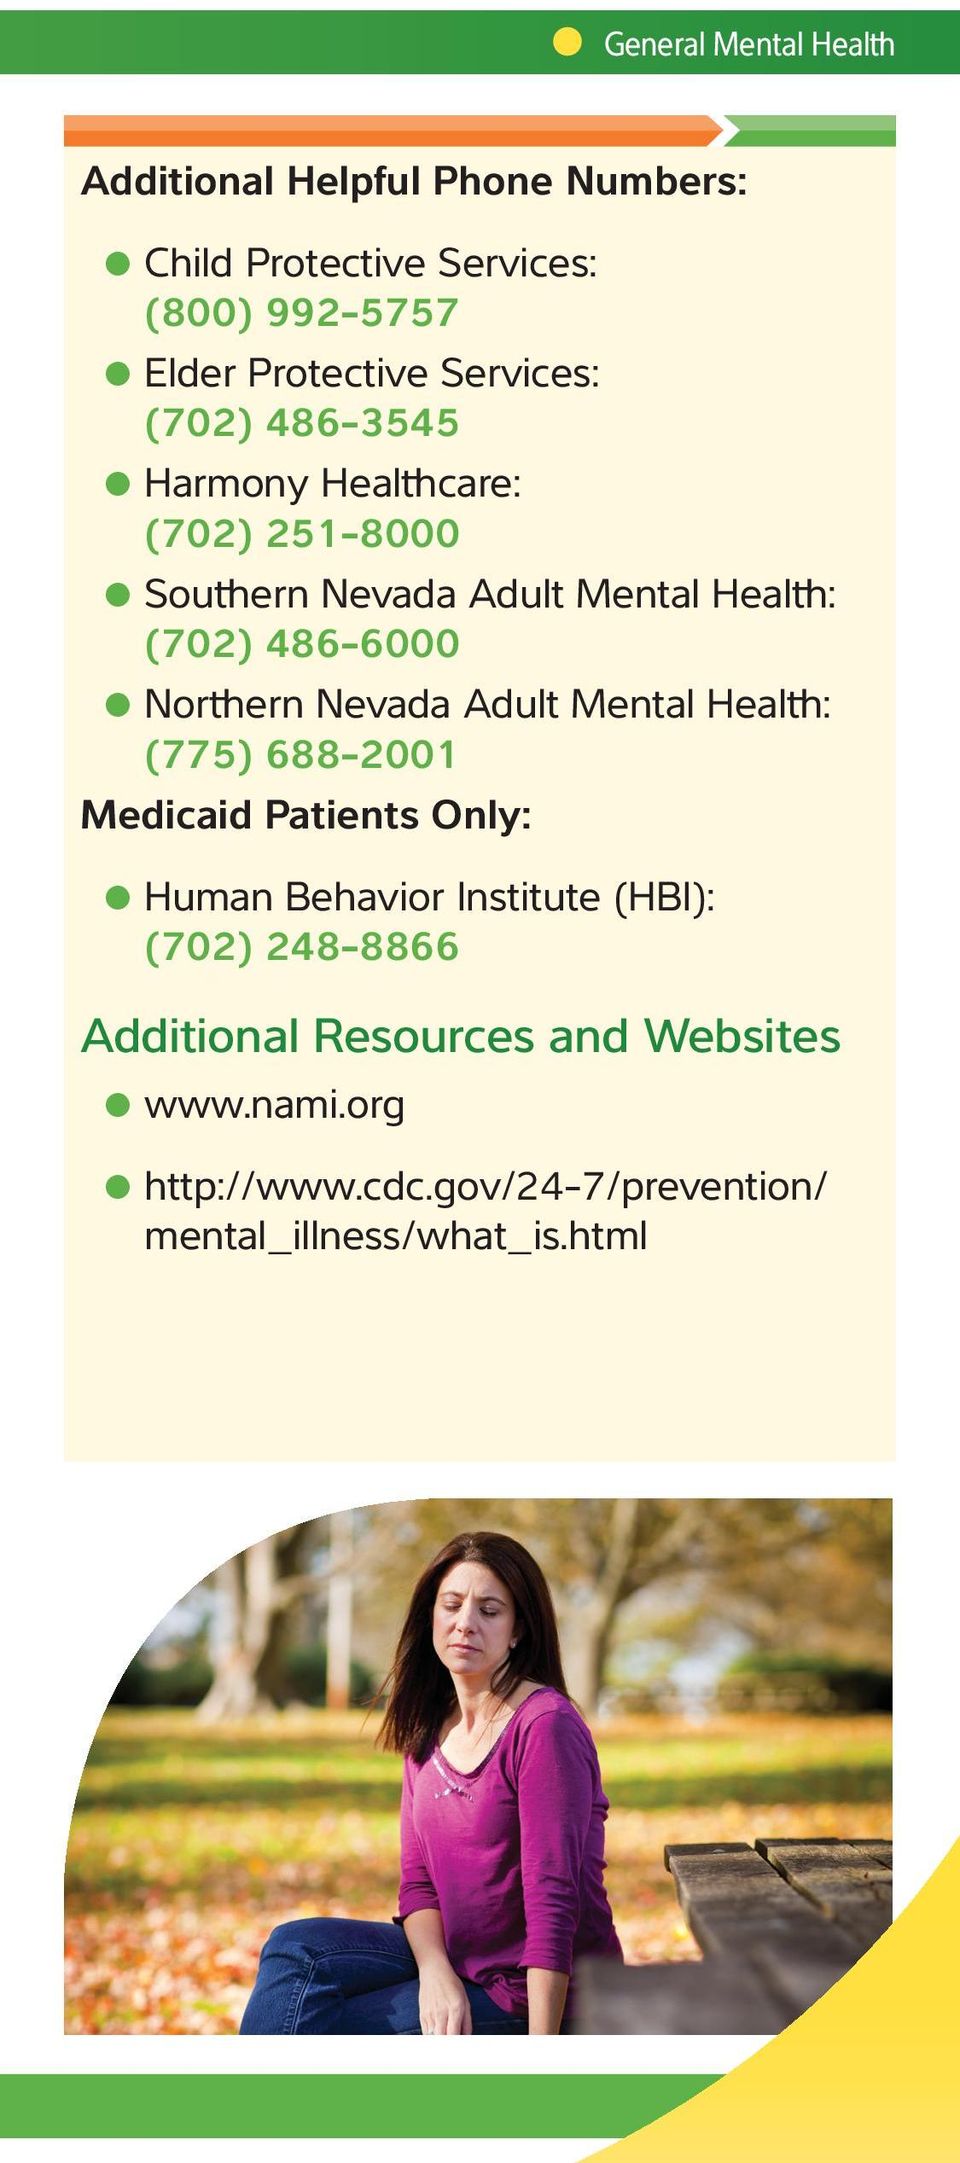 Northern Nevada Adult Mental Health: (775) 688-2001 Medicaid Patients Only: Human Behavior Institute (HBI): (702)